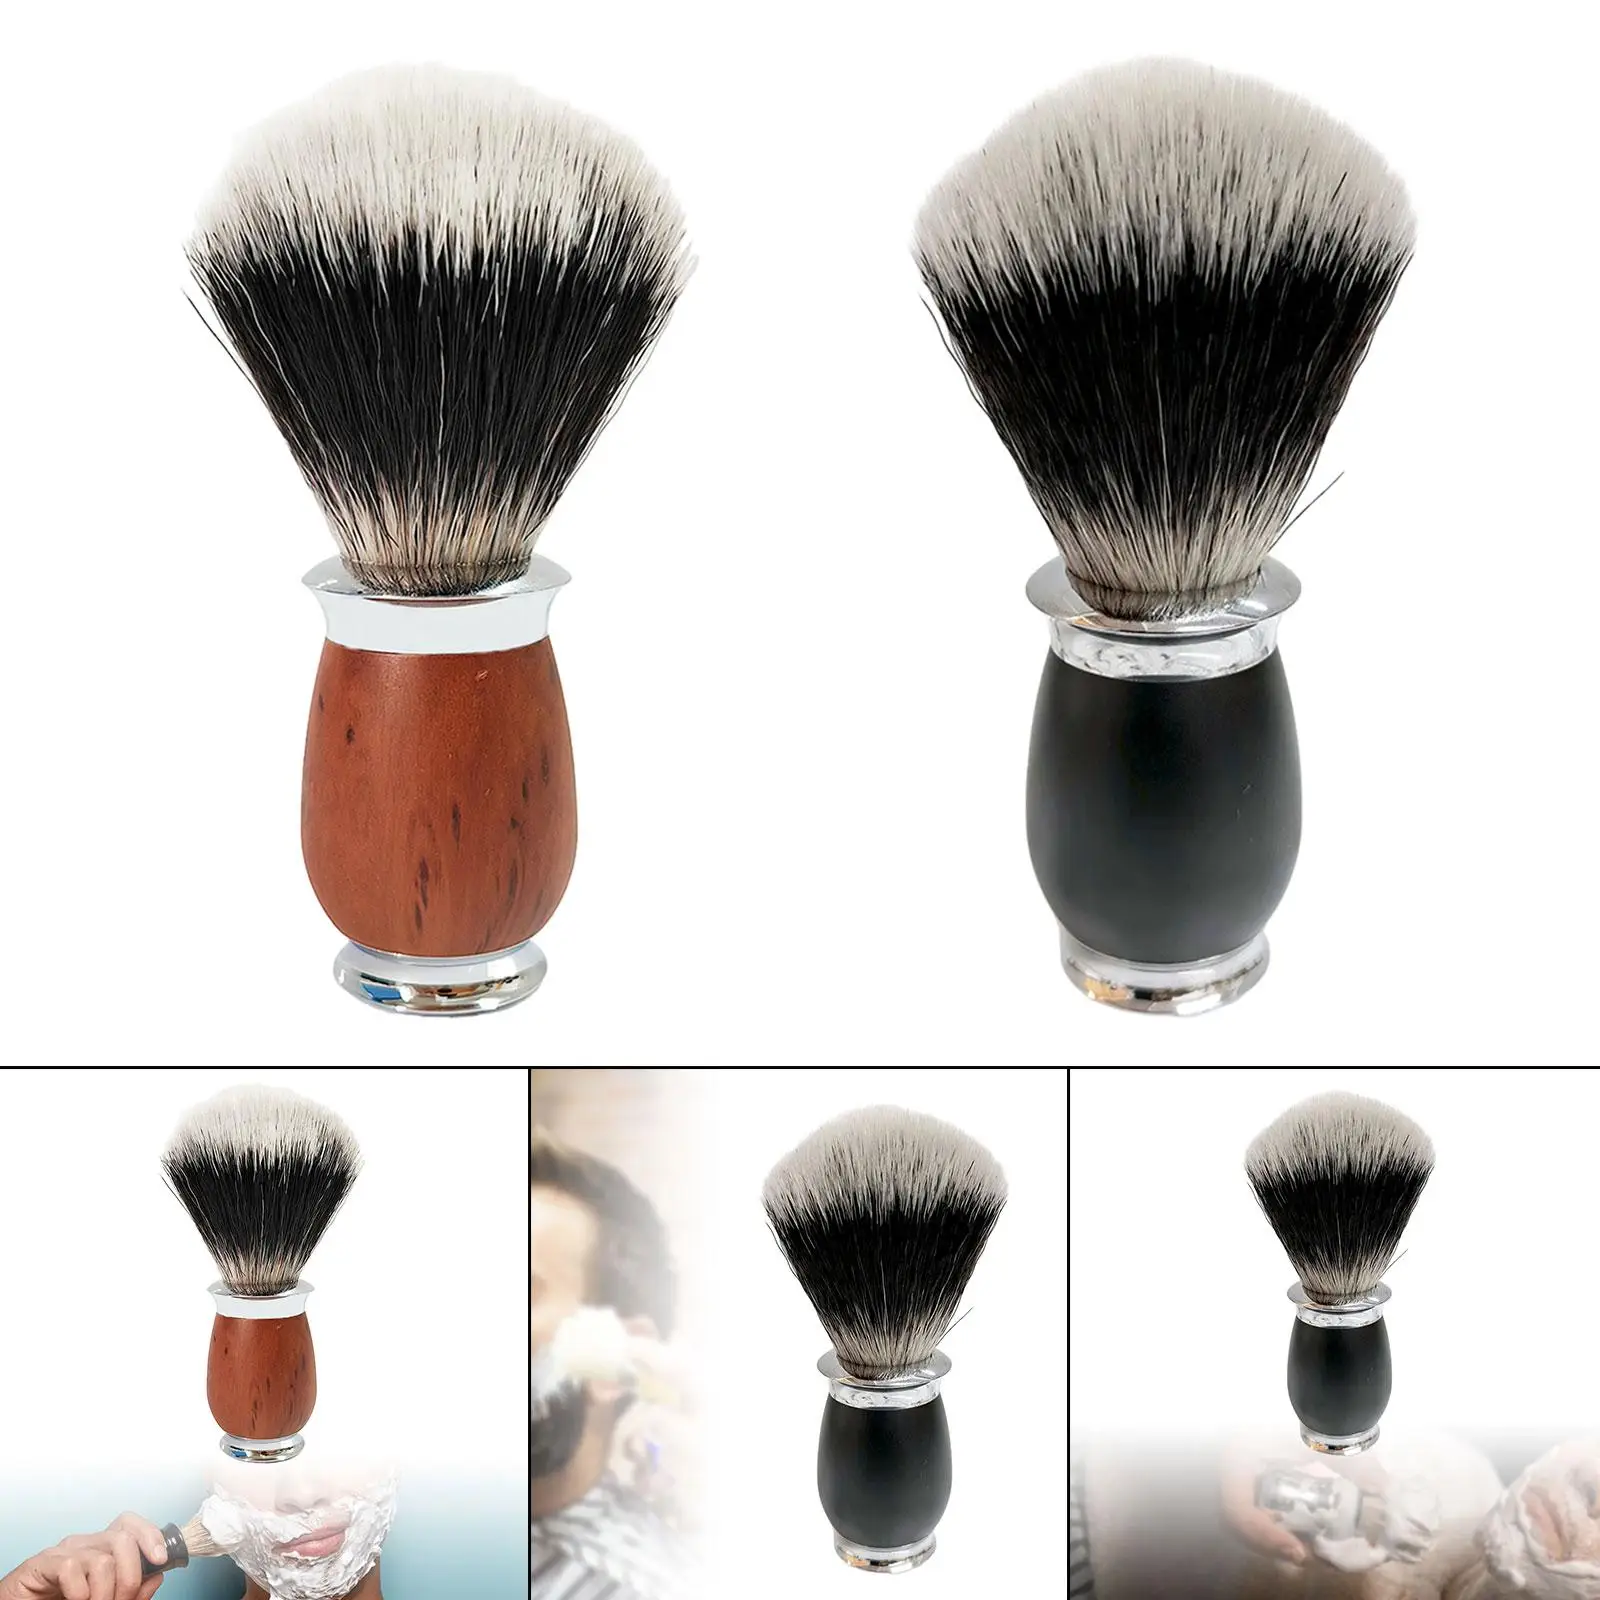 Men Shaving Brush Travel Rich and Fast Lather Shaving Cream Classic Handmade Beard Cleaning for Professional Barber Salon Tools